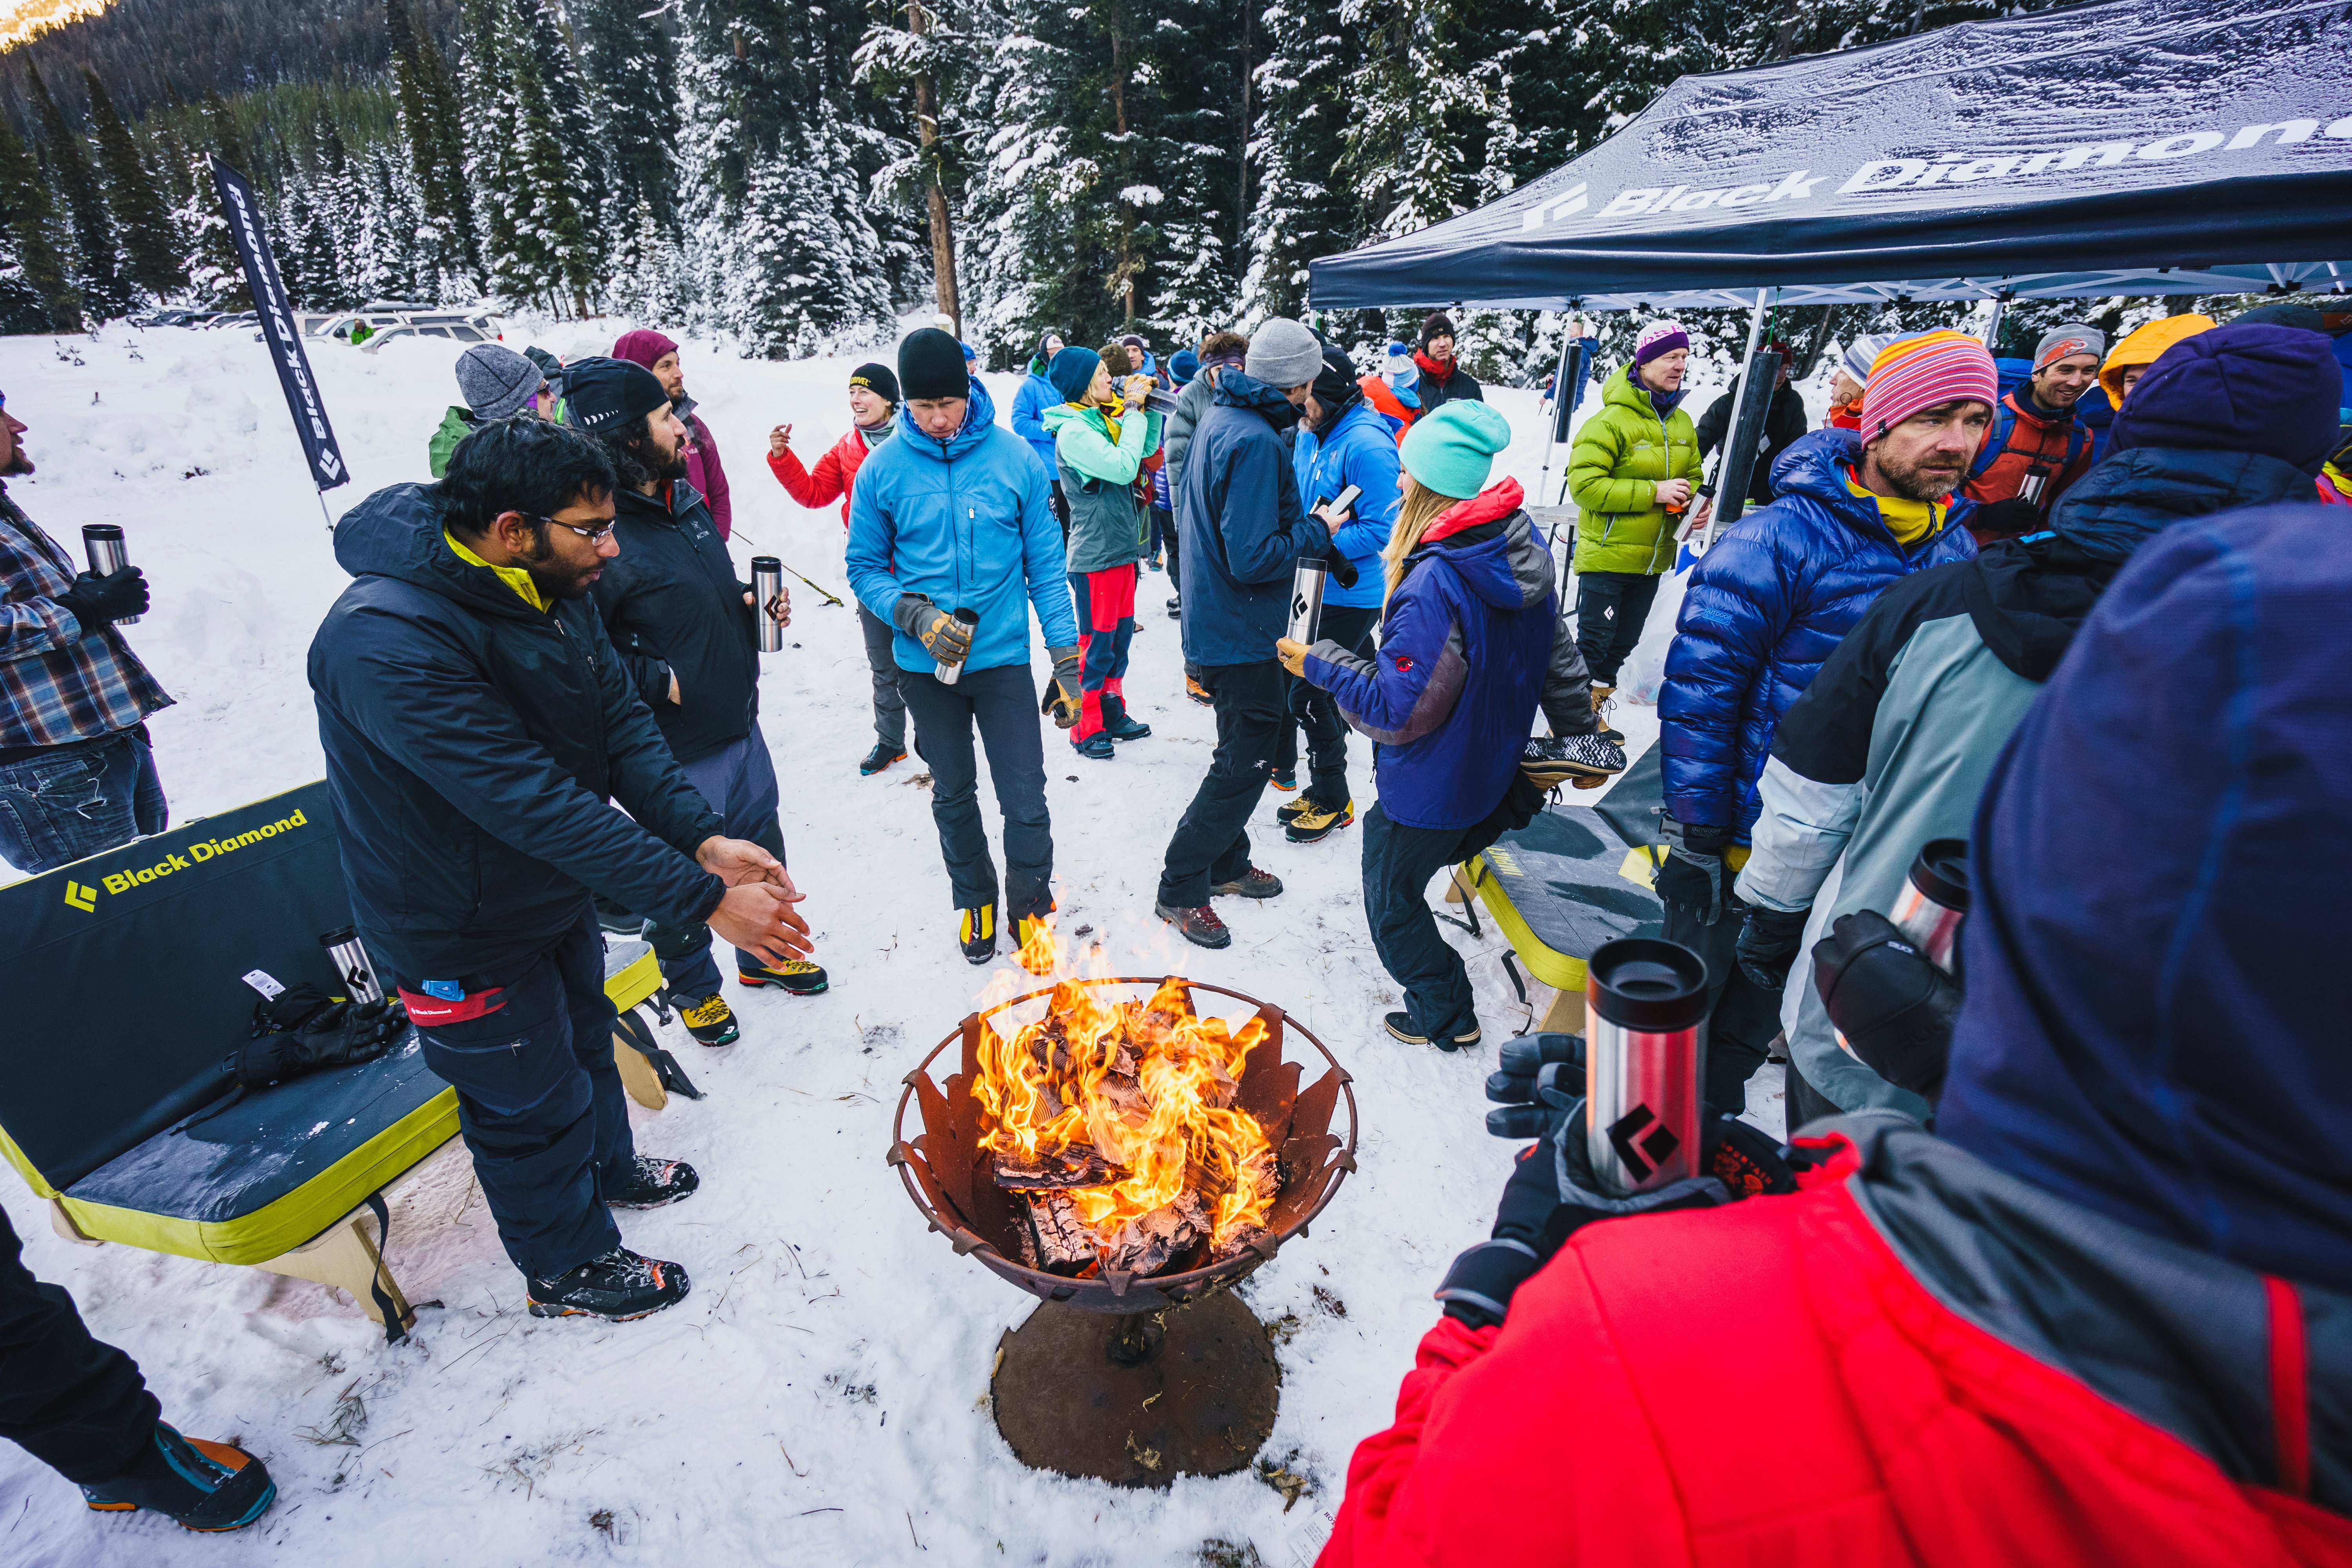 participants gather around a fire at the Bozeman Ice Festival